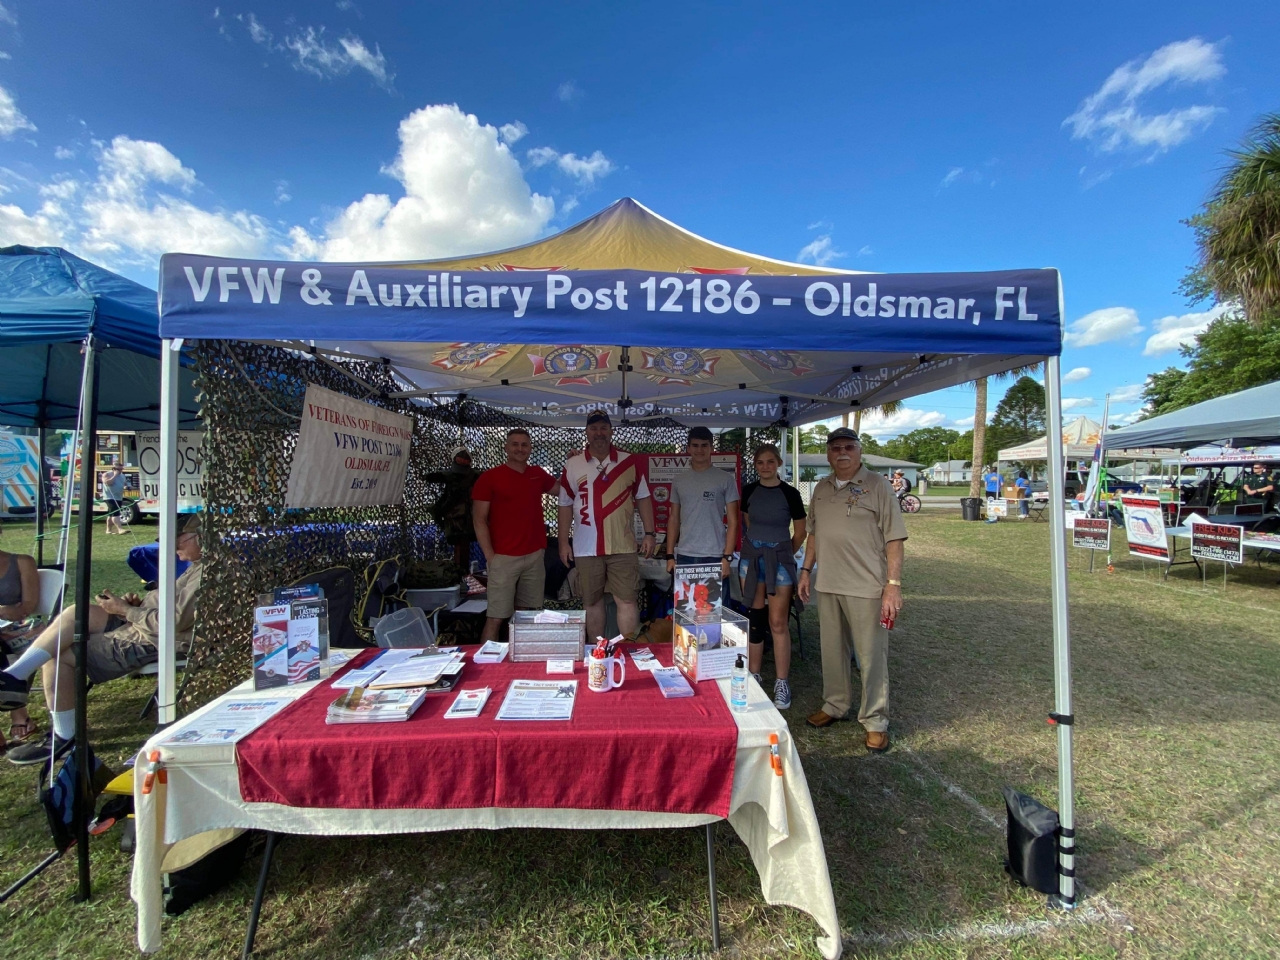 Oldsmar Days and Nights took place from March 25-27th. It was a joint effort event with the Post. 